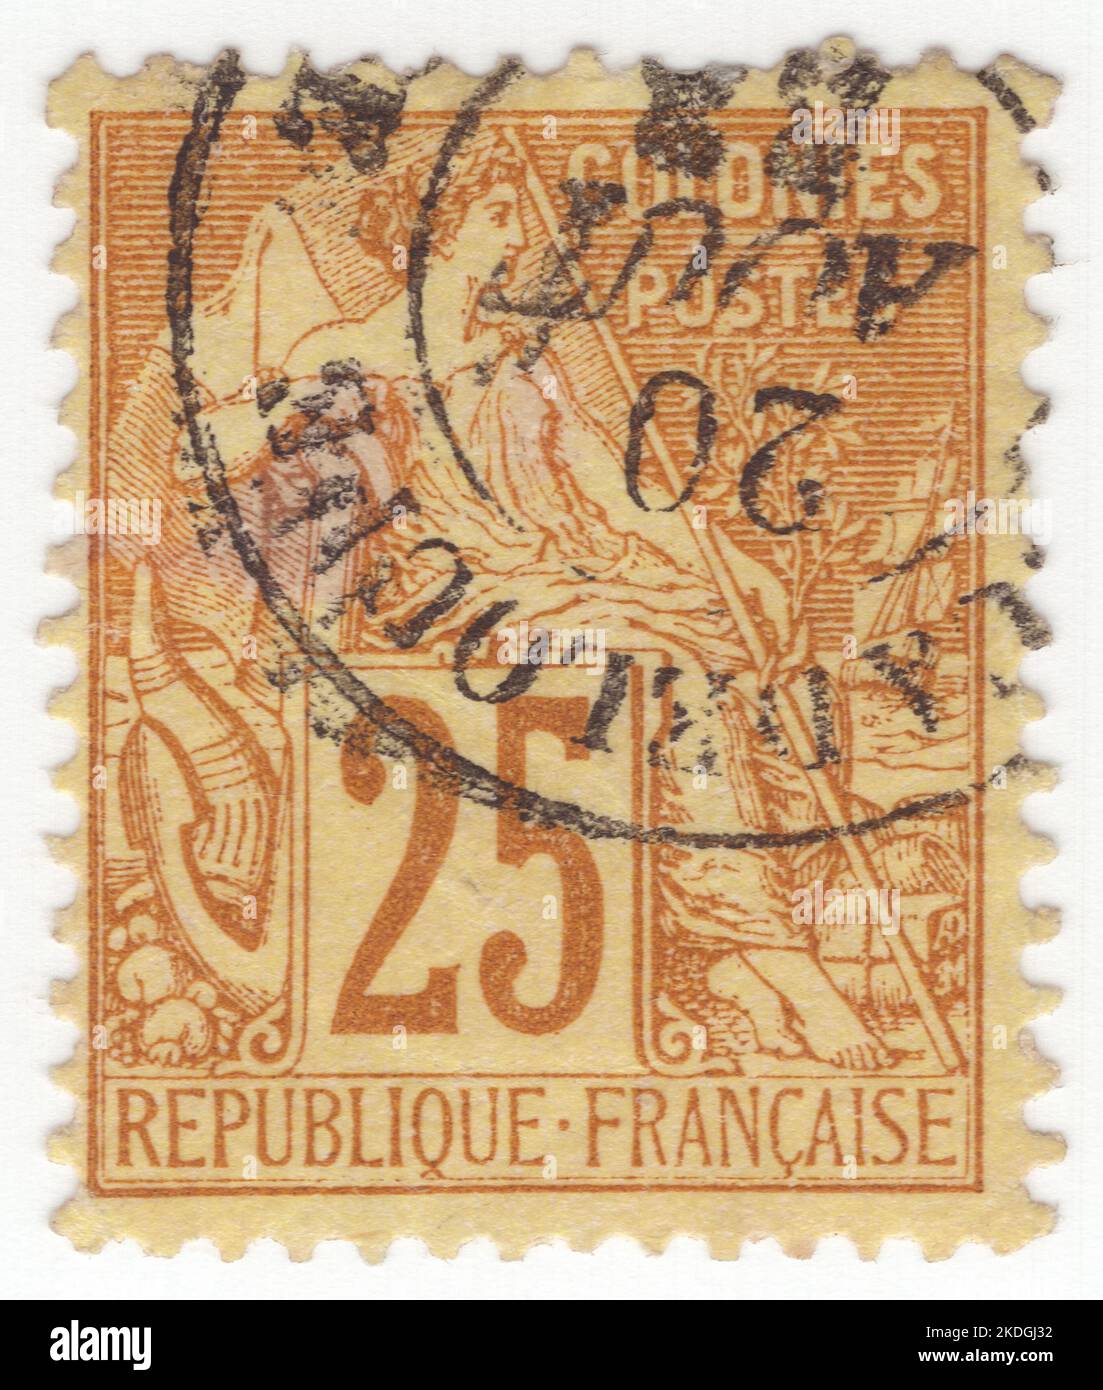 FRENCH COLONIES - 1881: An 25 centimes yellow-brown on straw postage stamp depicting allegory female figure 'Commerce' sitting alone and inscribed 'COLONIES'. Series French Colonies by Alphee Dubois Stock Photo